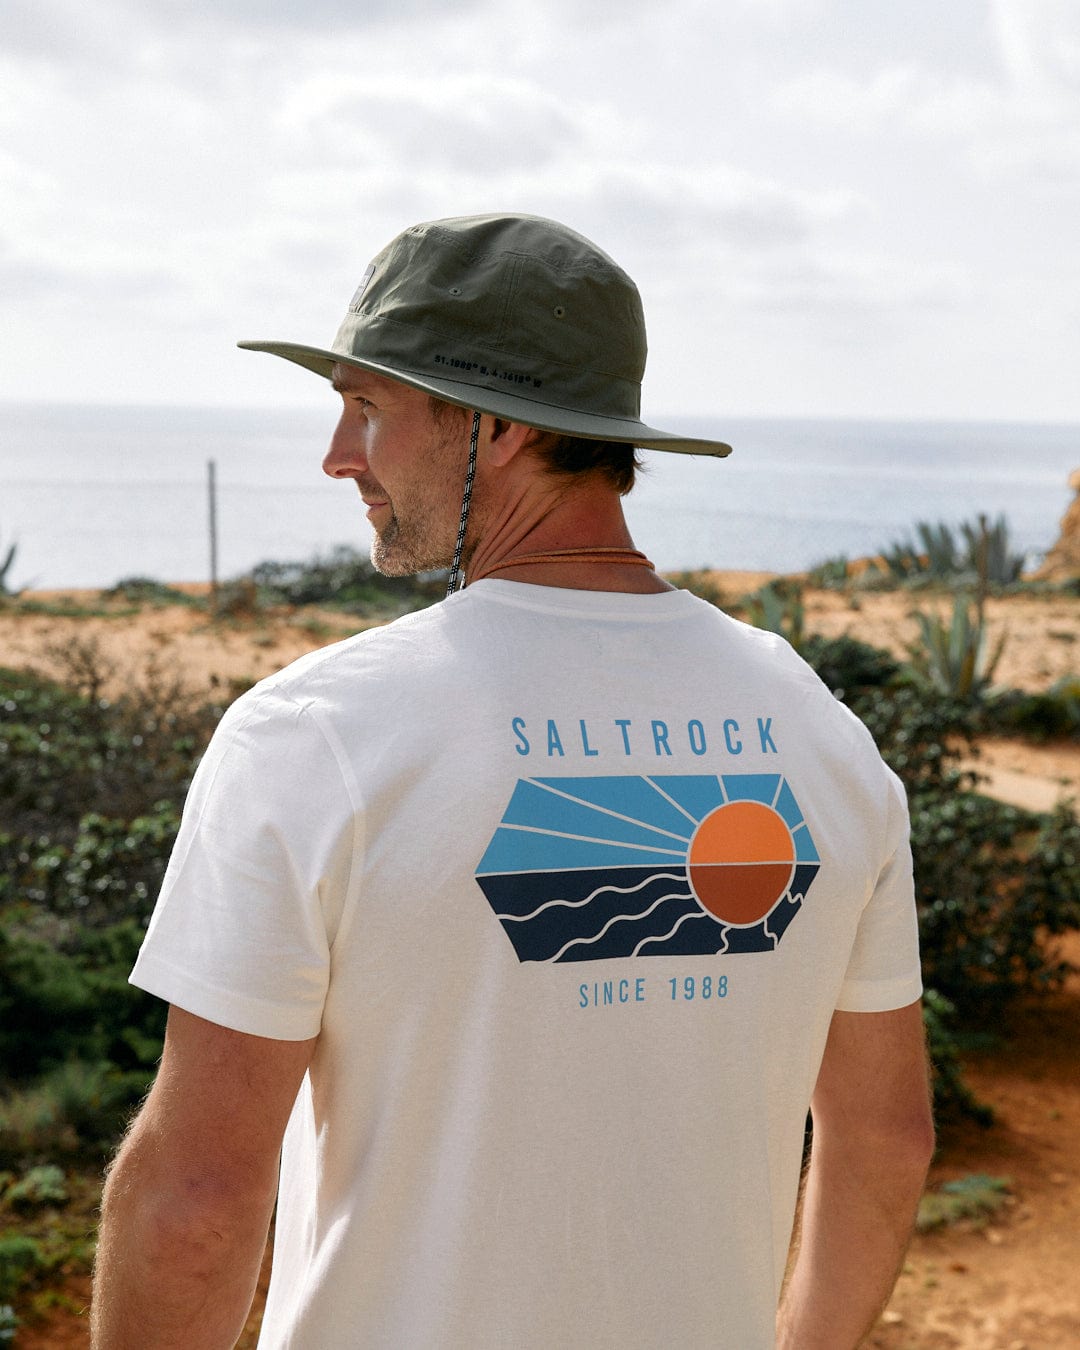 A man wearing a Saltrock Green Gaitor bucket hat and a t-shirt with the "Saltrock since 1988" logo on the back looks out towards a coastal landscape.